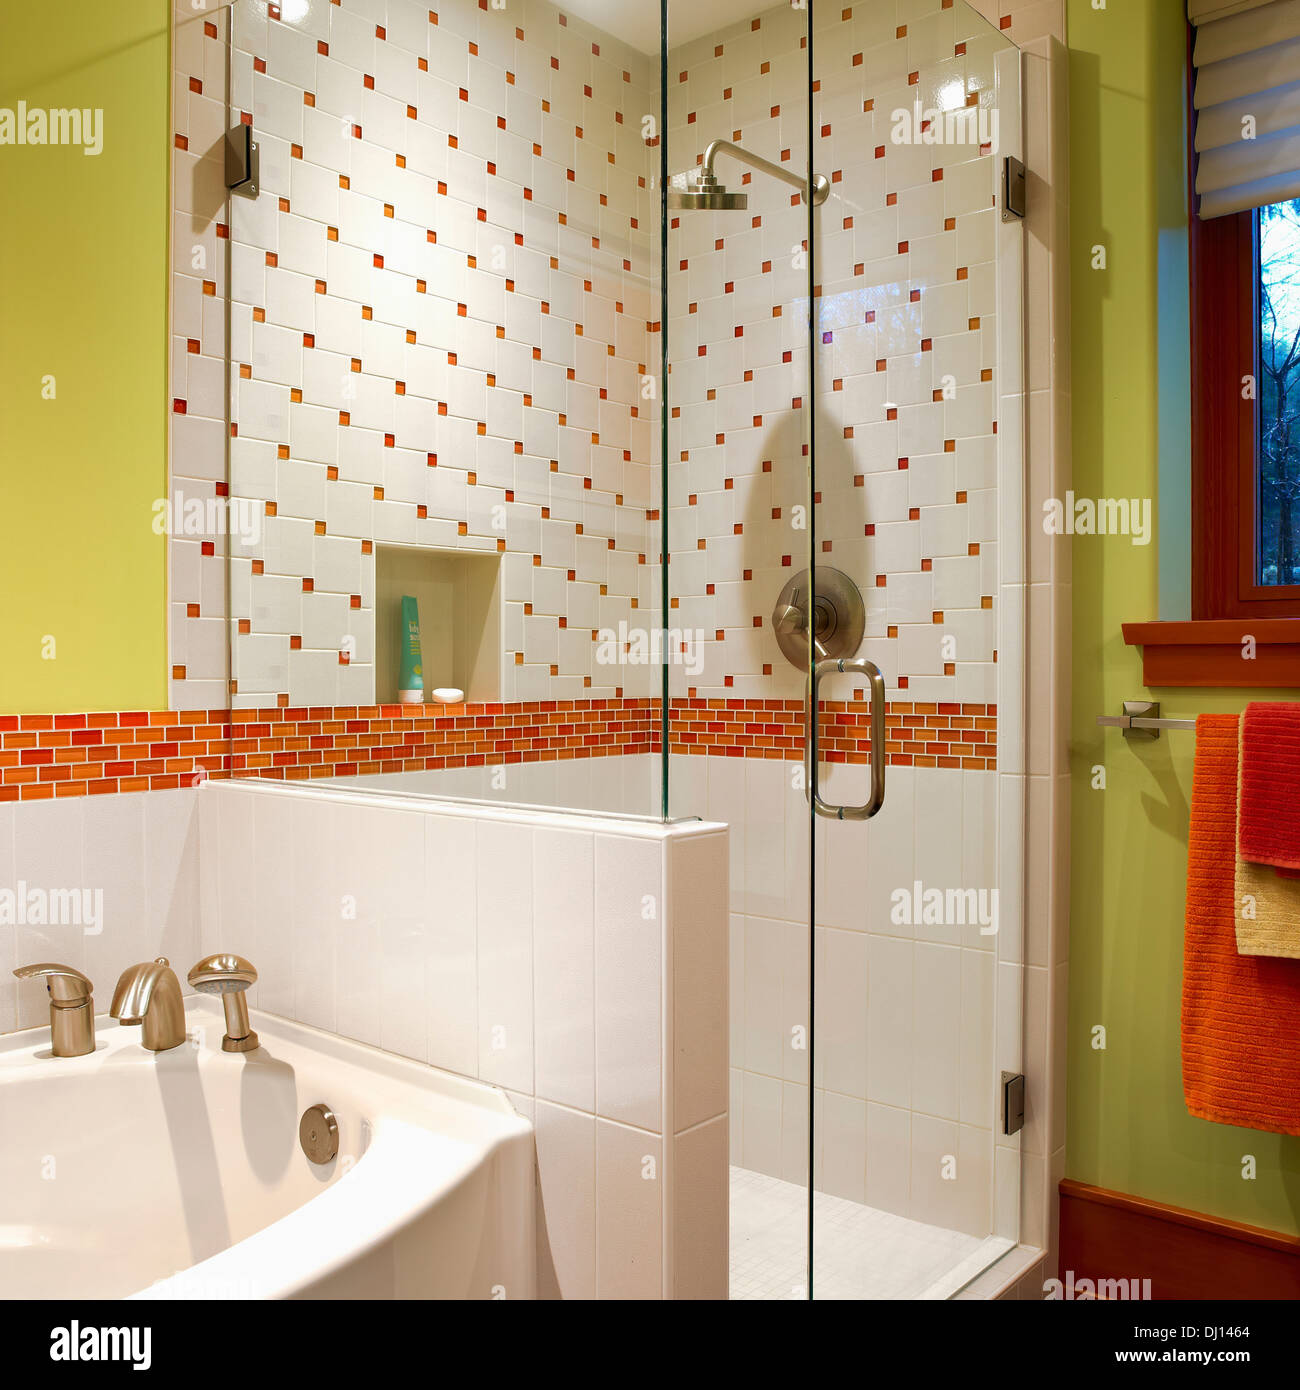 Shower Stall With Lime Green Walls And Orange And White Tiles; Victoria, Vancouver Island, British Columbia, Canada Stock Photo